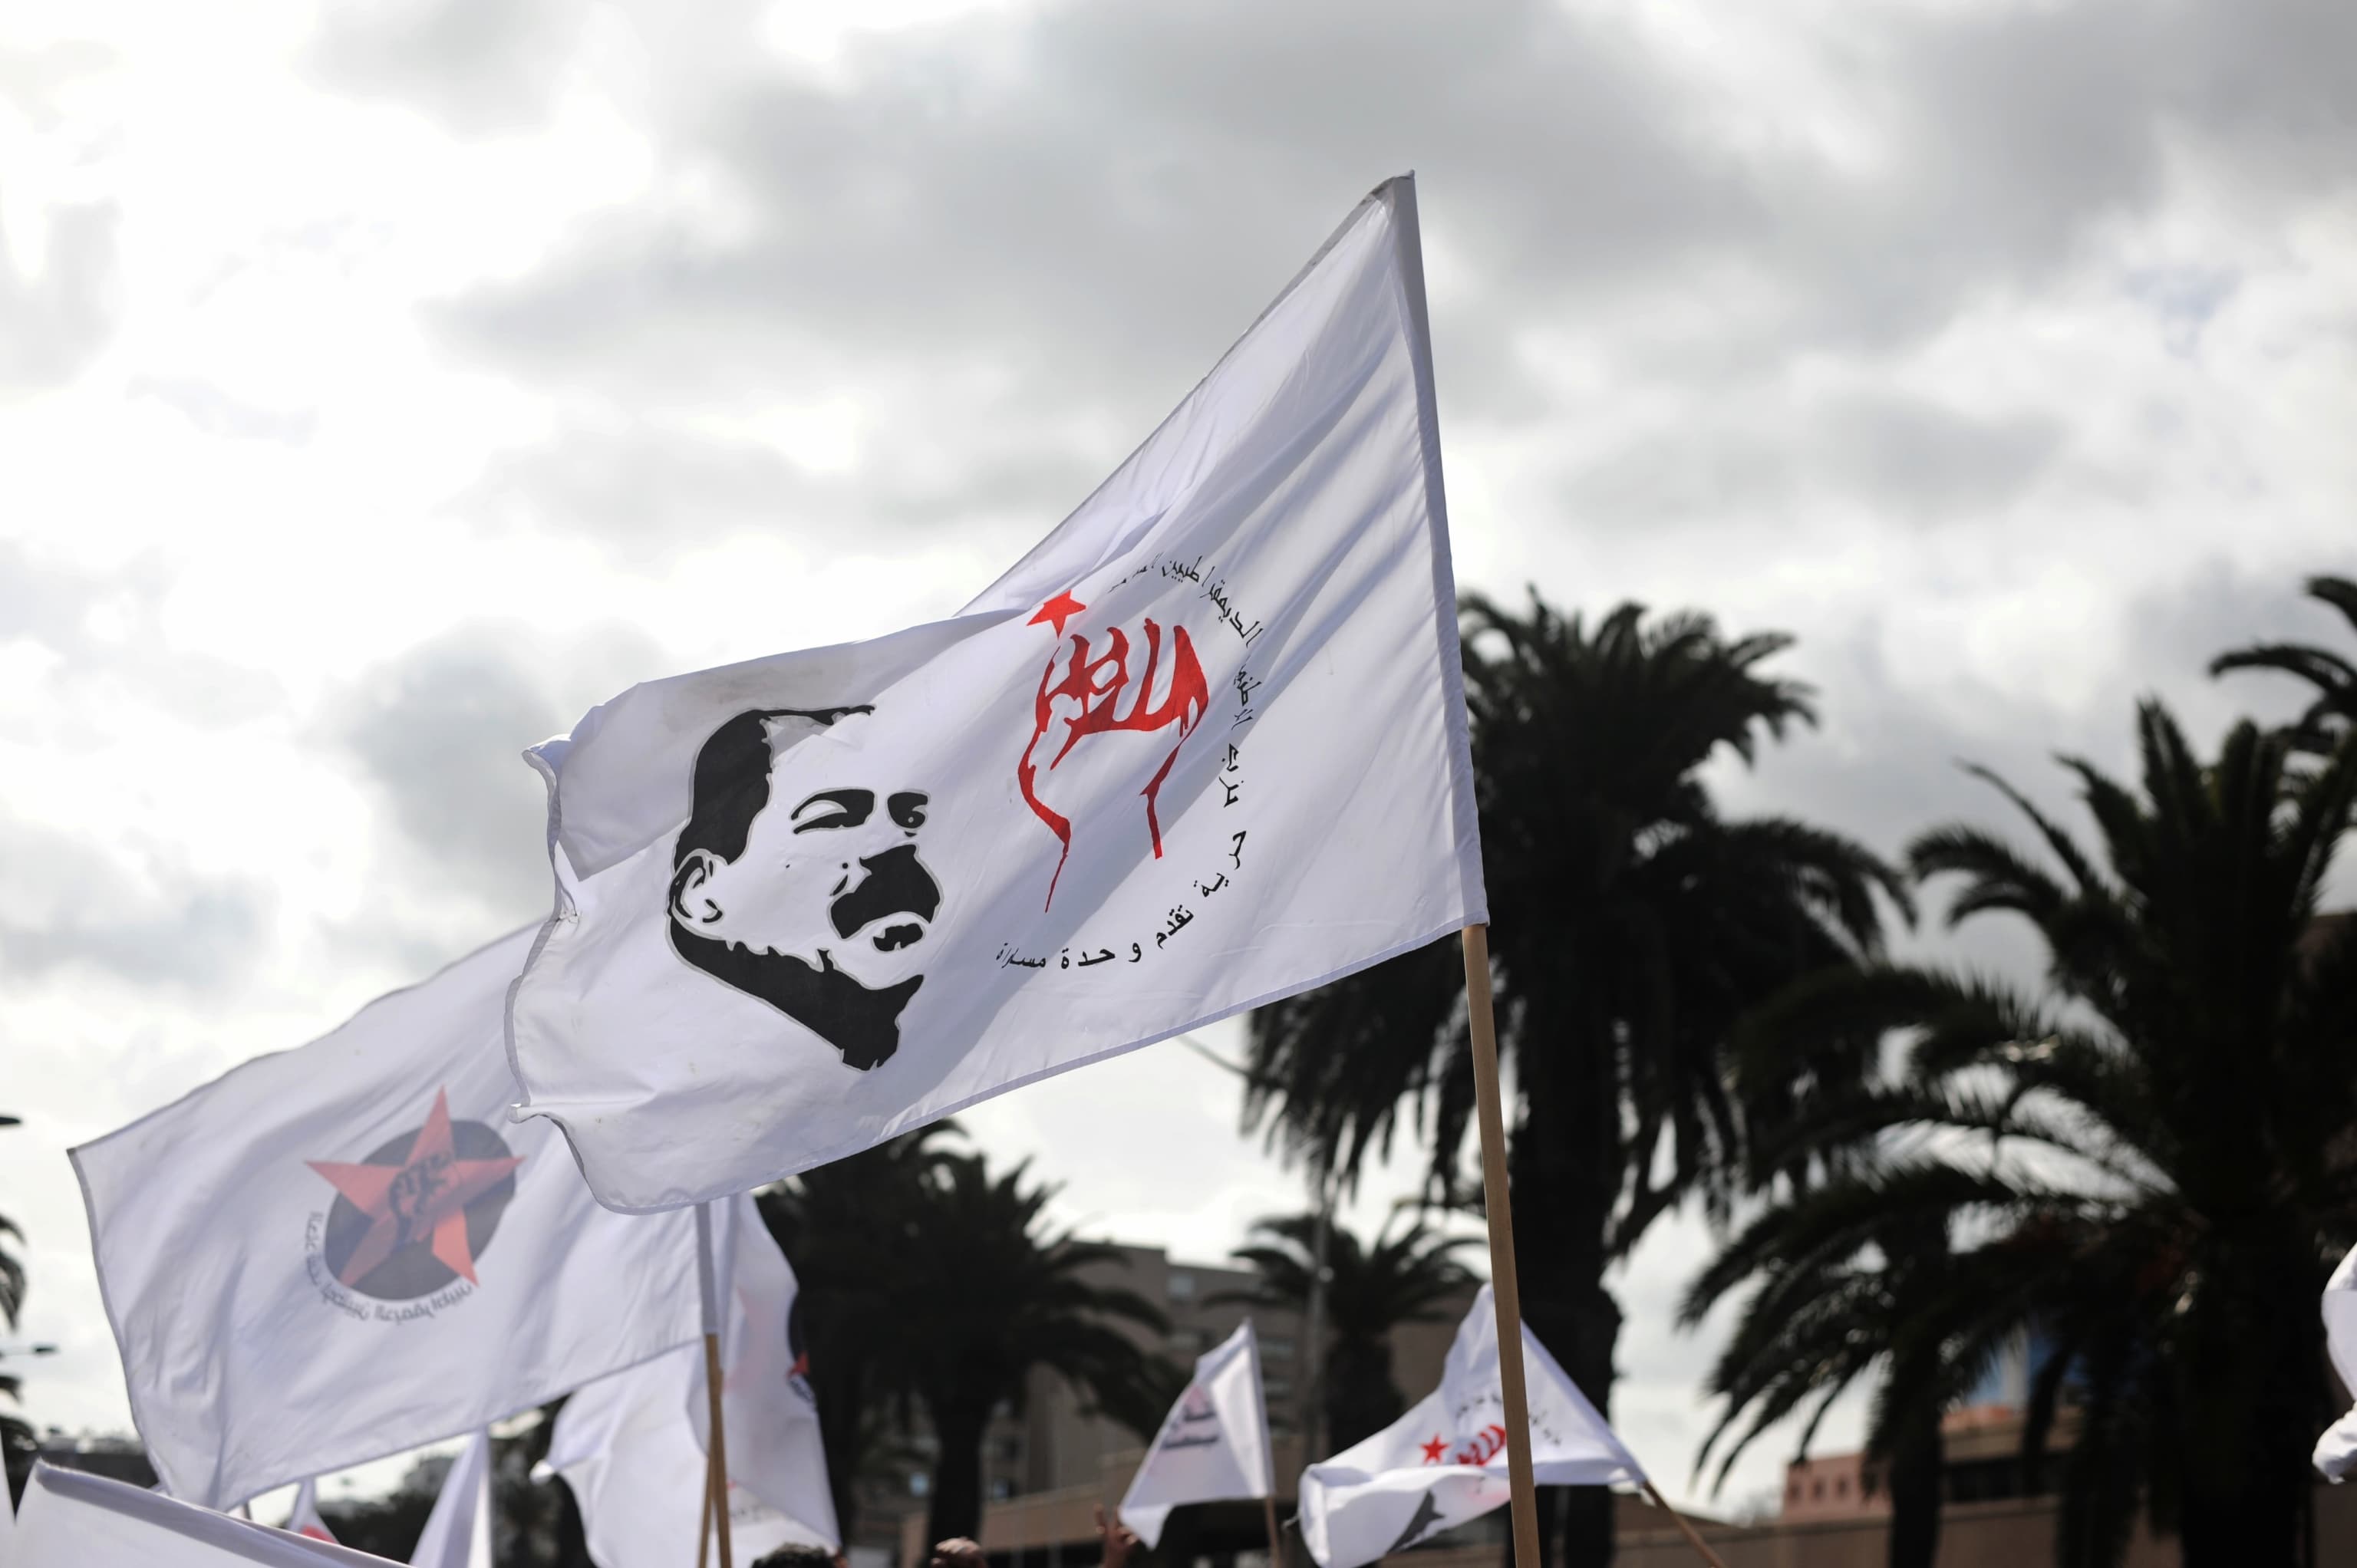 Tunisia: 4 Sentenced to Death for Murder of Key Politician